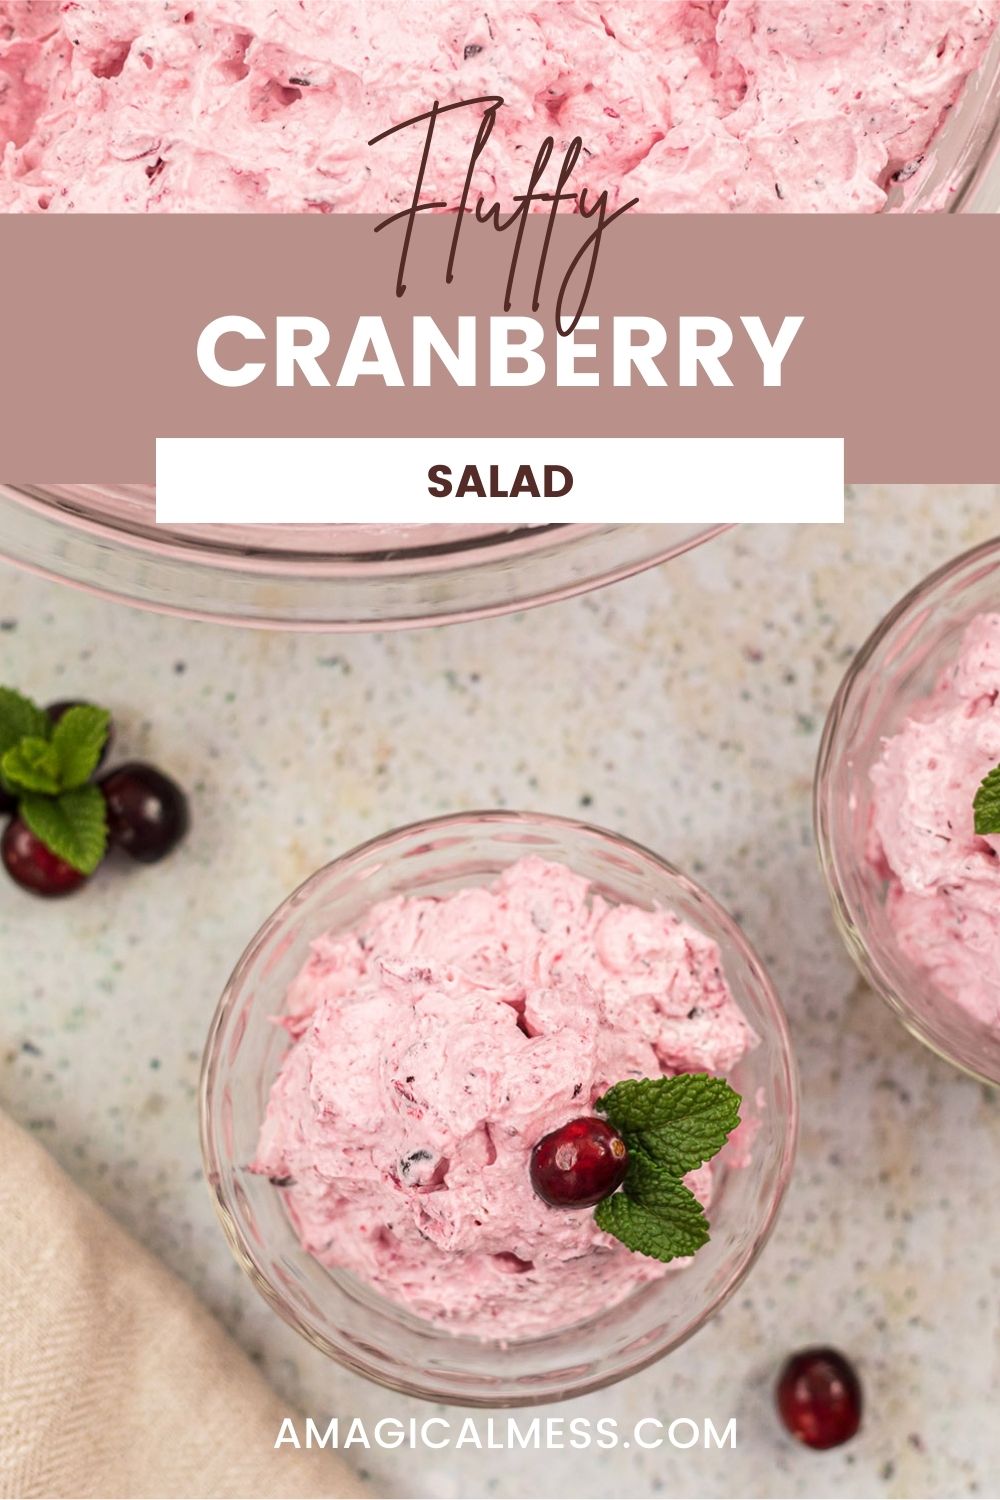 Bowls filled with pink fluffy cranberry salad topped with cranberries.